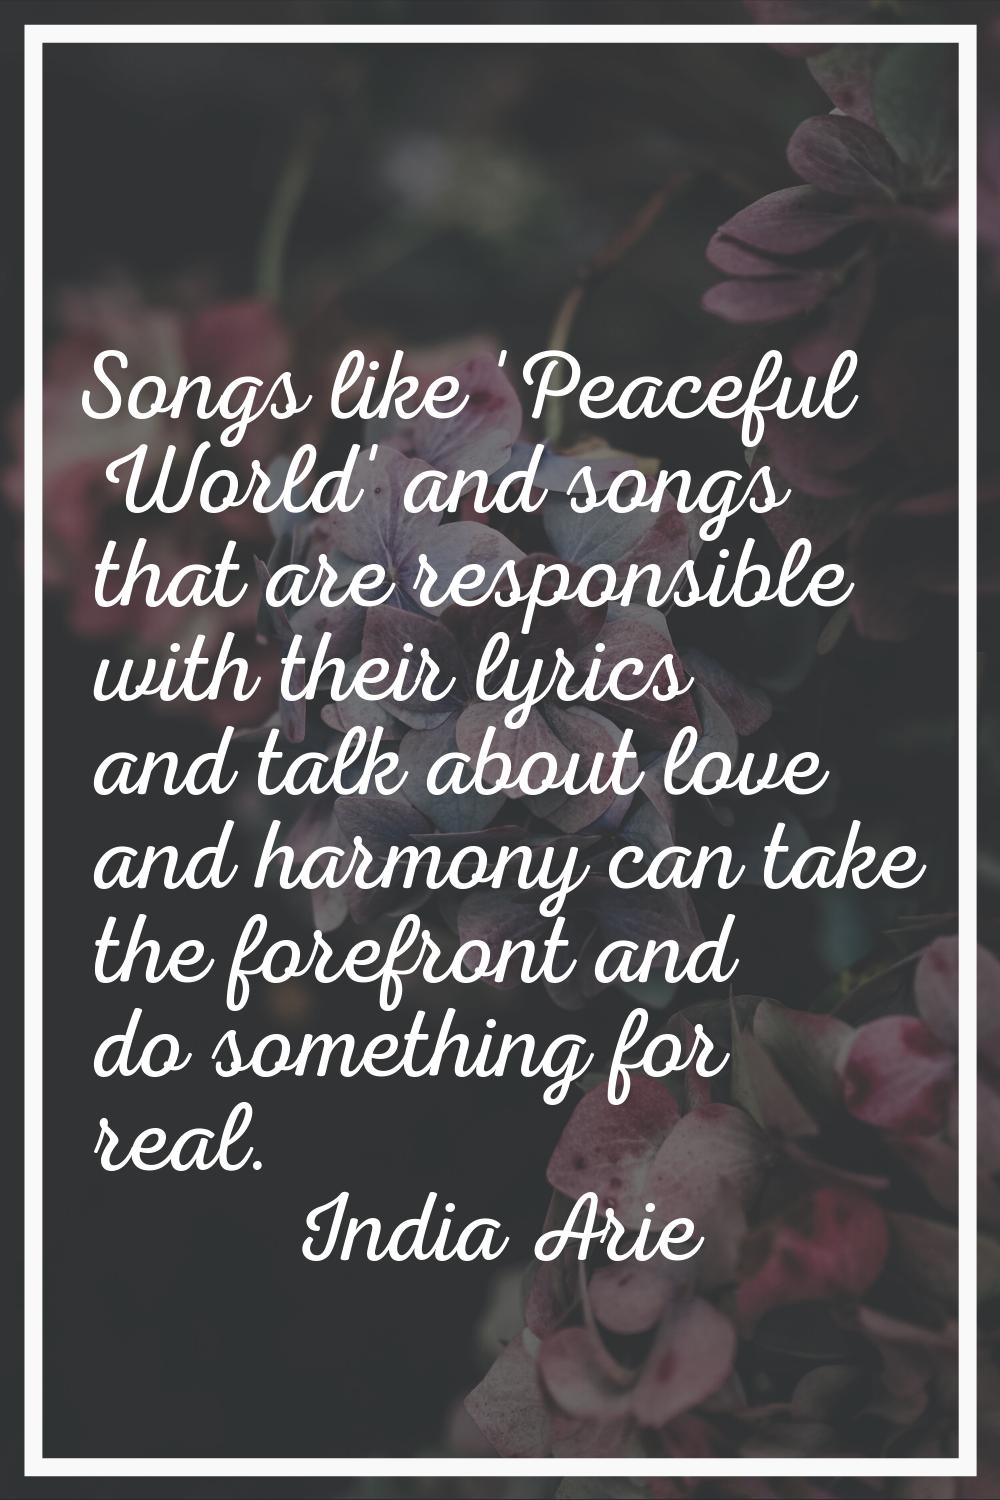 Songs like 'Peaceful World' and songs that are responsible with their lyrics and talk about love an